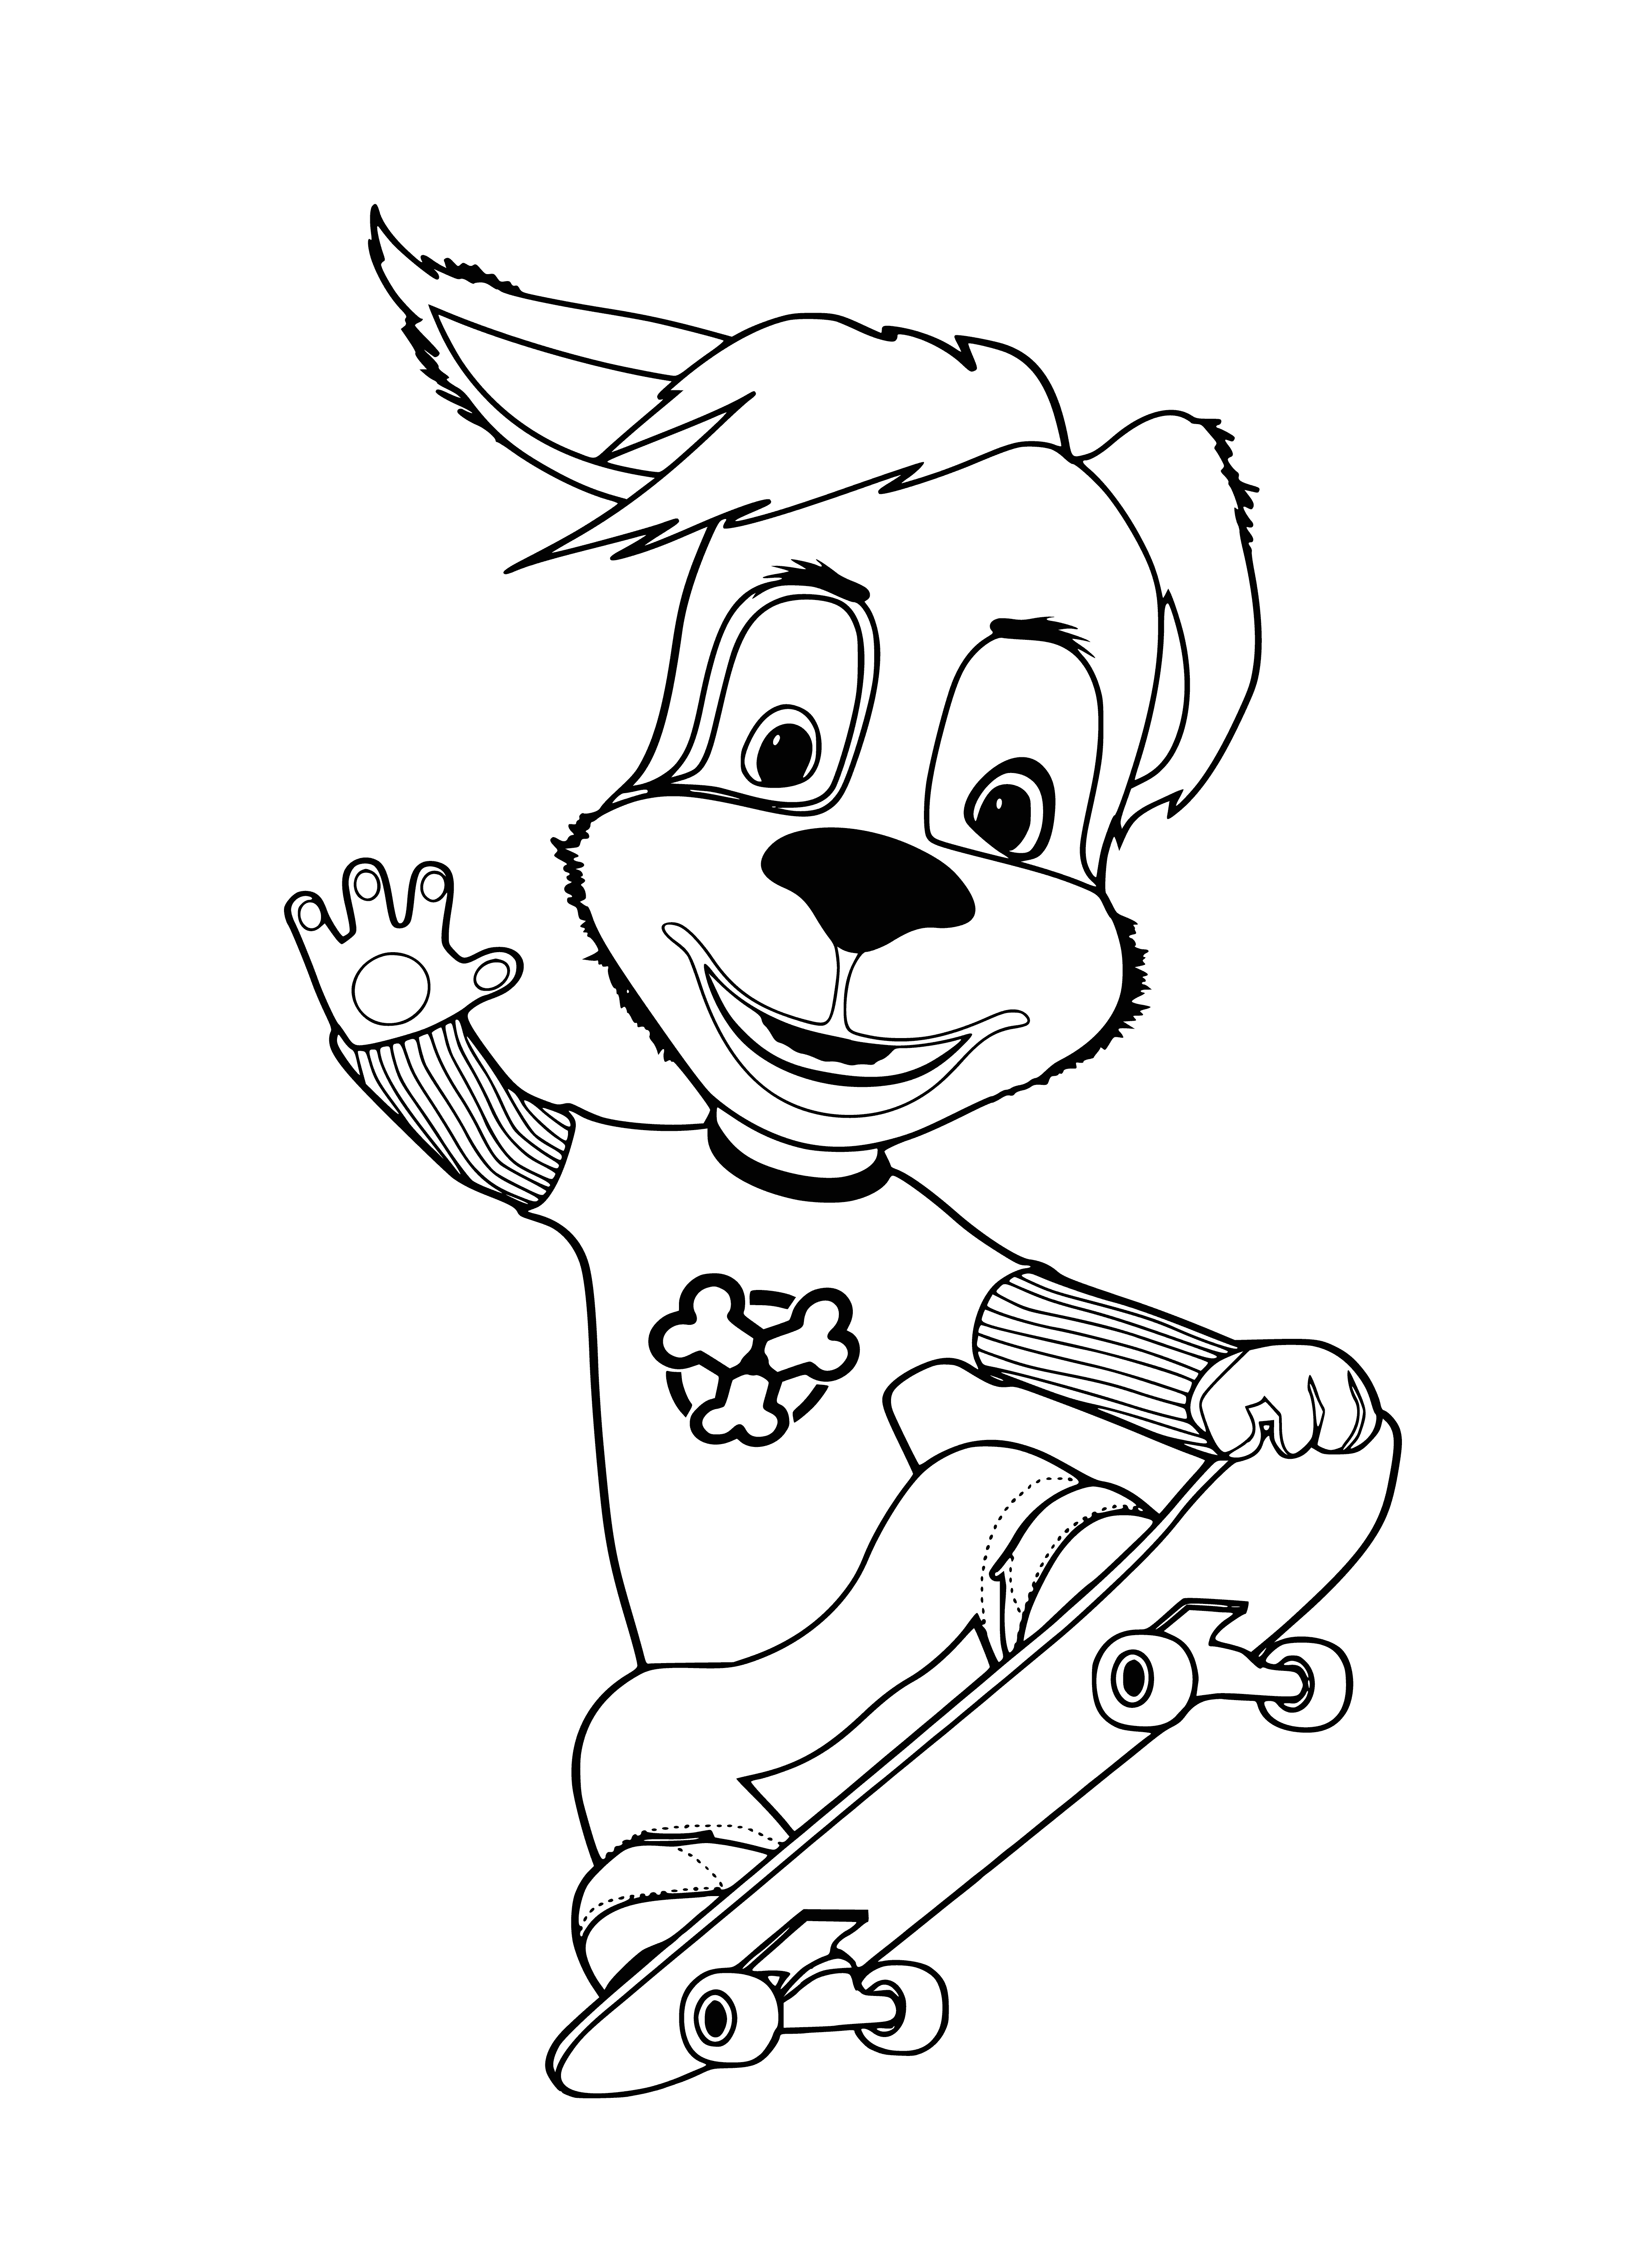 Skate friend coloring page